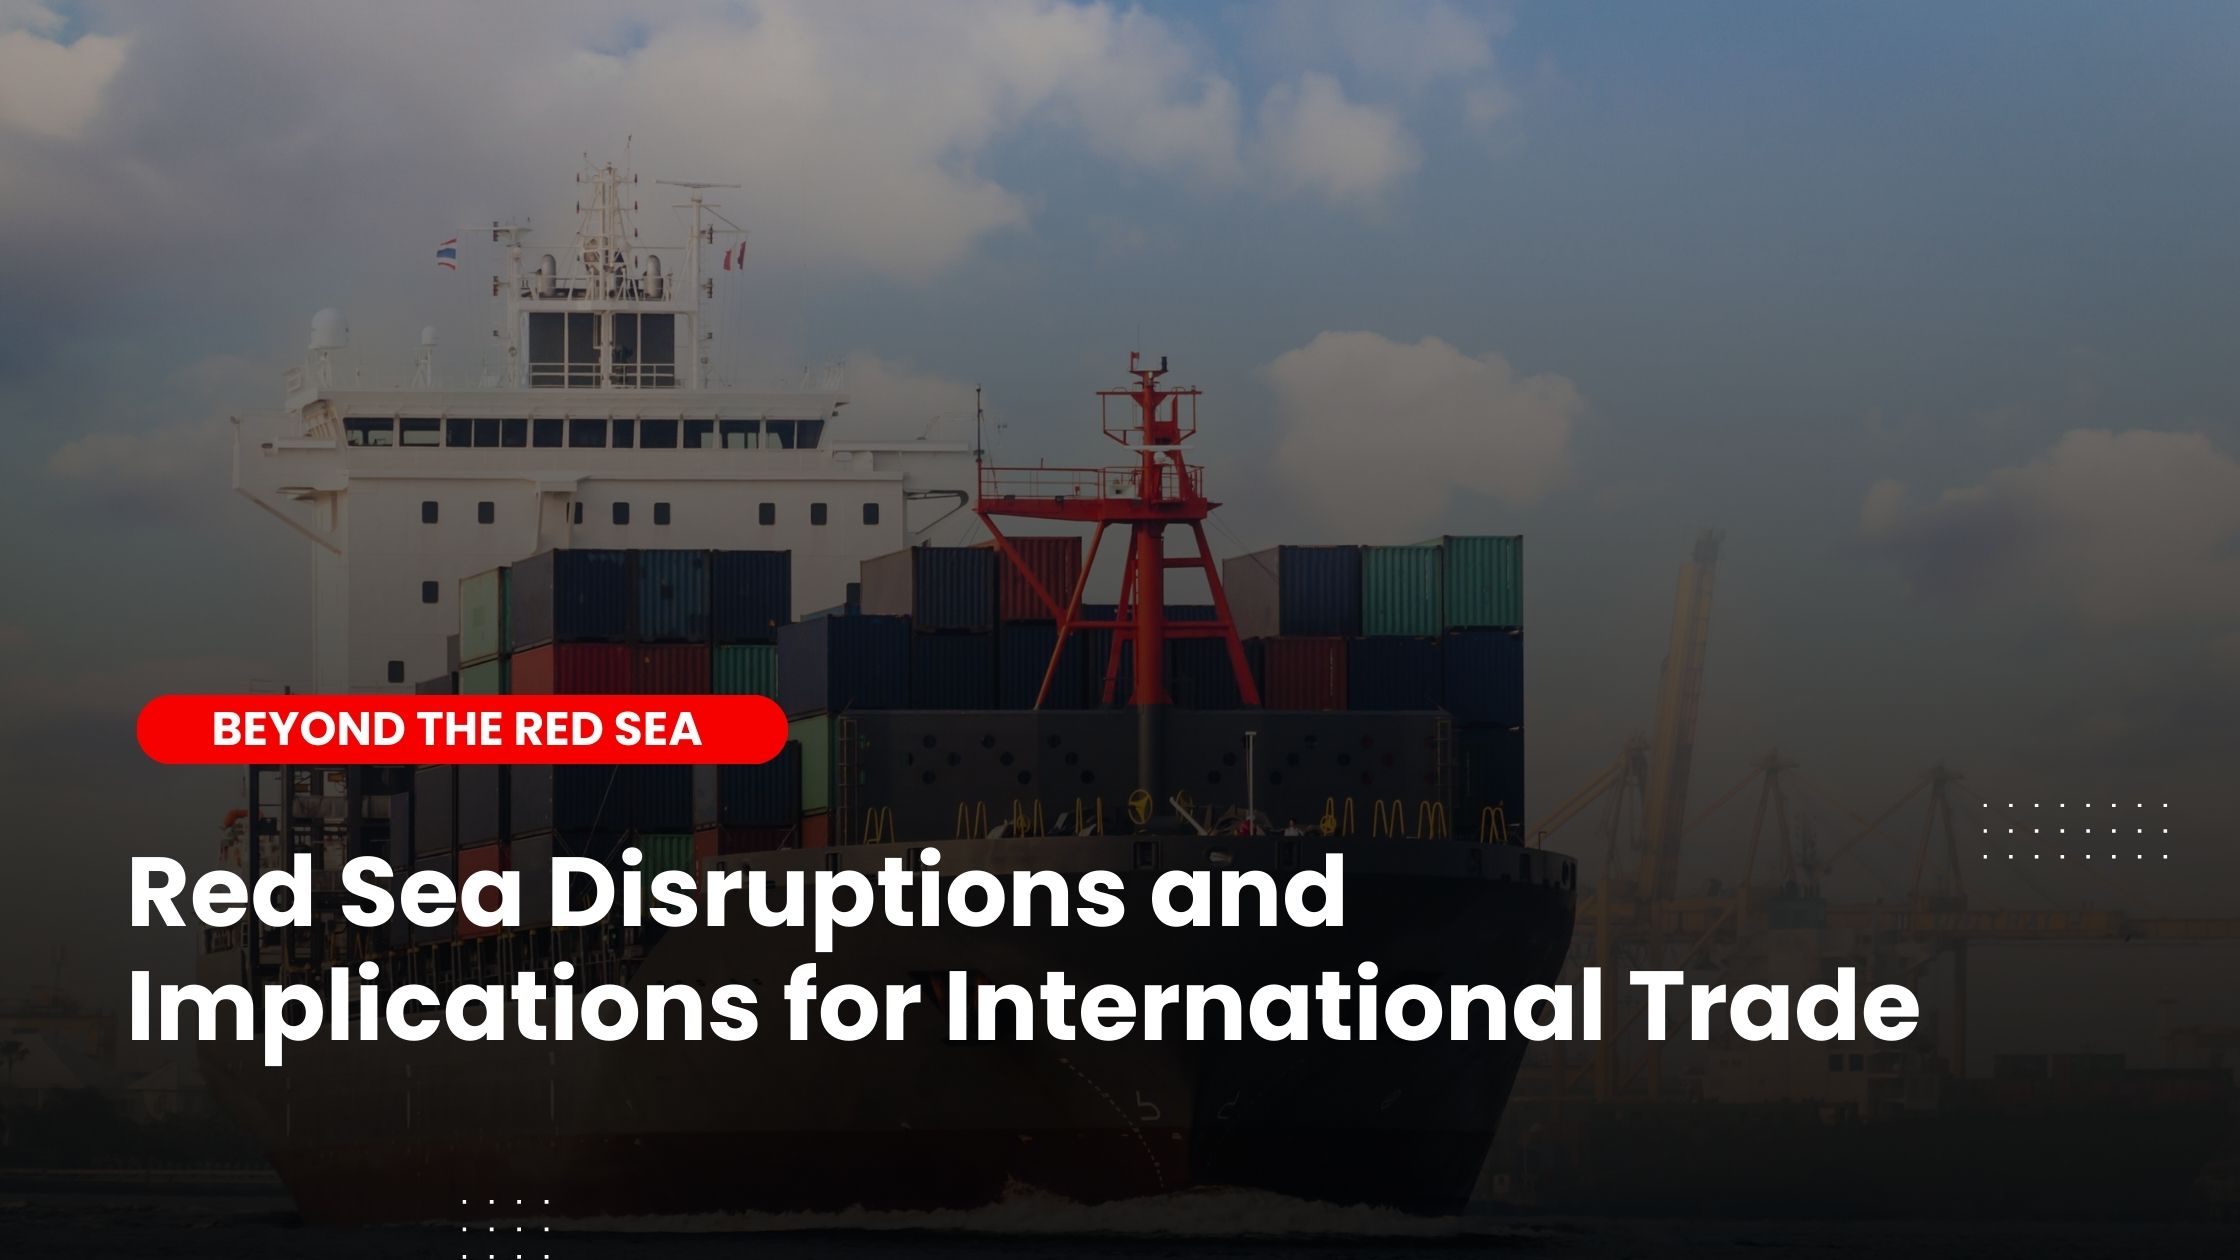 Red Sea Disruptions and Implications for International Trade